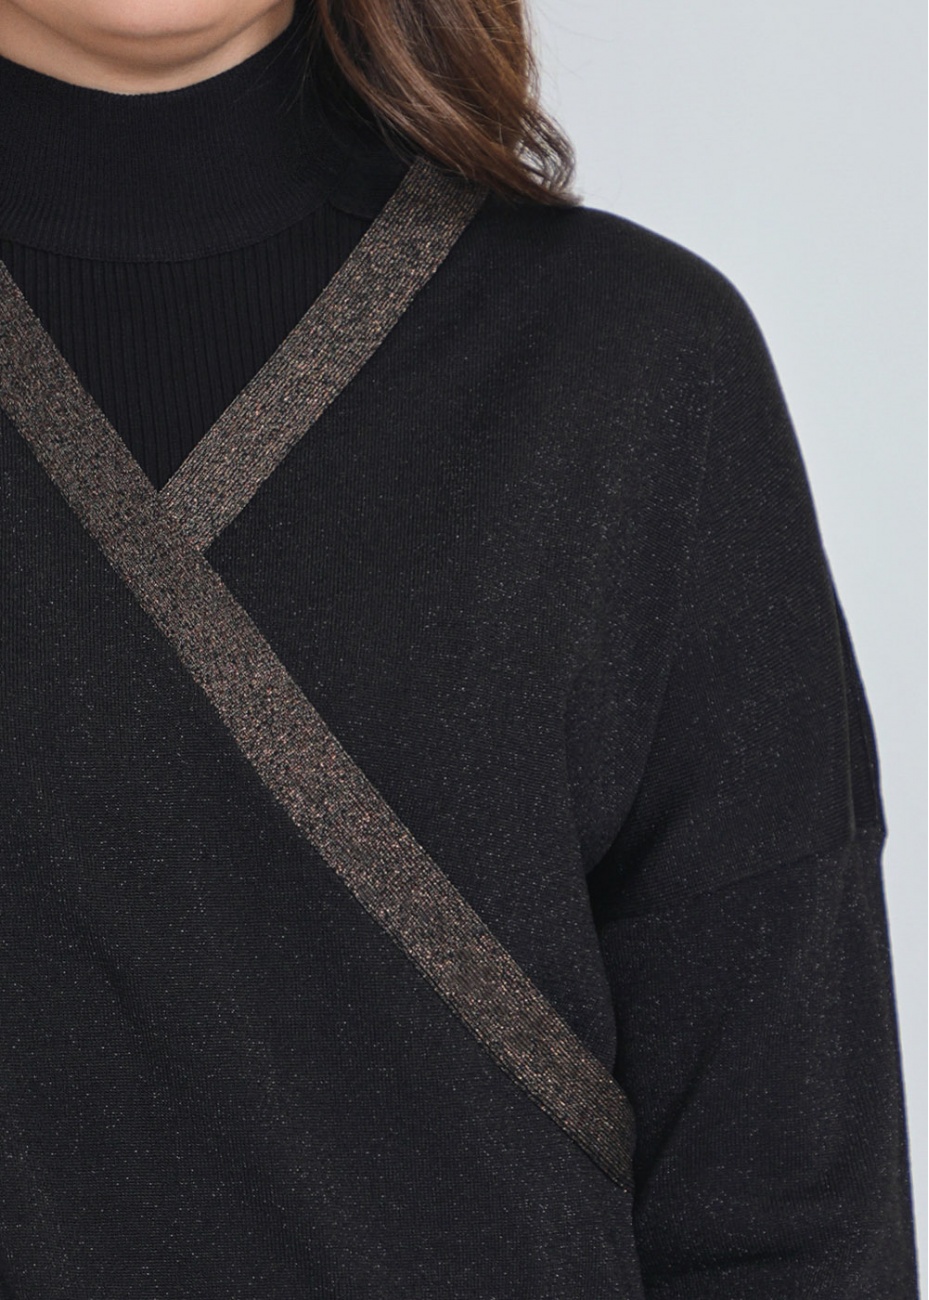 Black V-Neck Sweater with Brown Edges